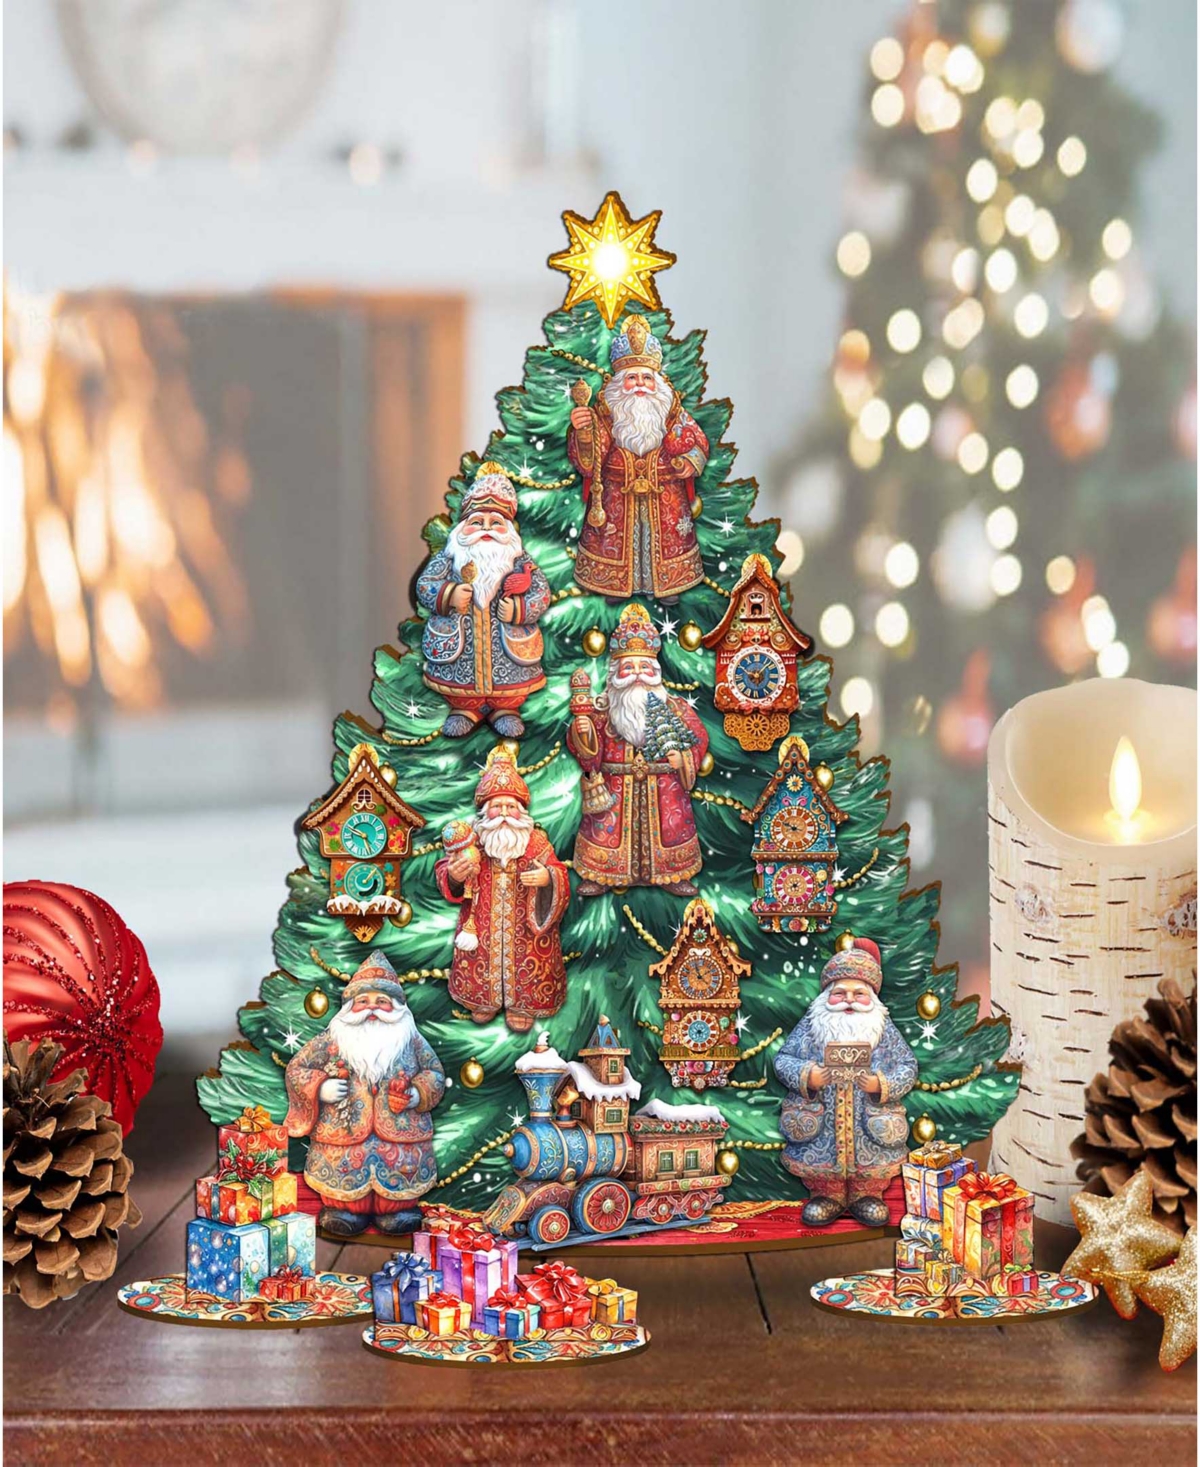 Shop Designocracy Santa Christmas Arrival Themed Wooden Christmas Tree With Ornaments Set Of 13 G. Debrekht In Multi Color